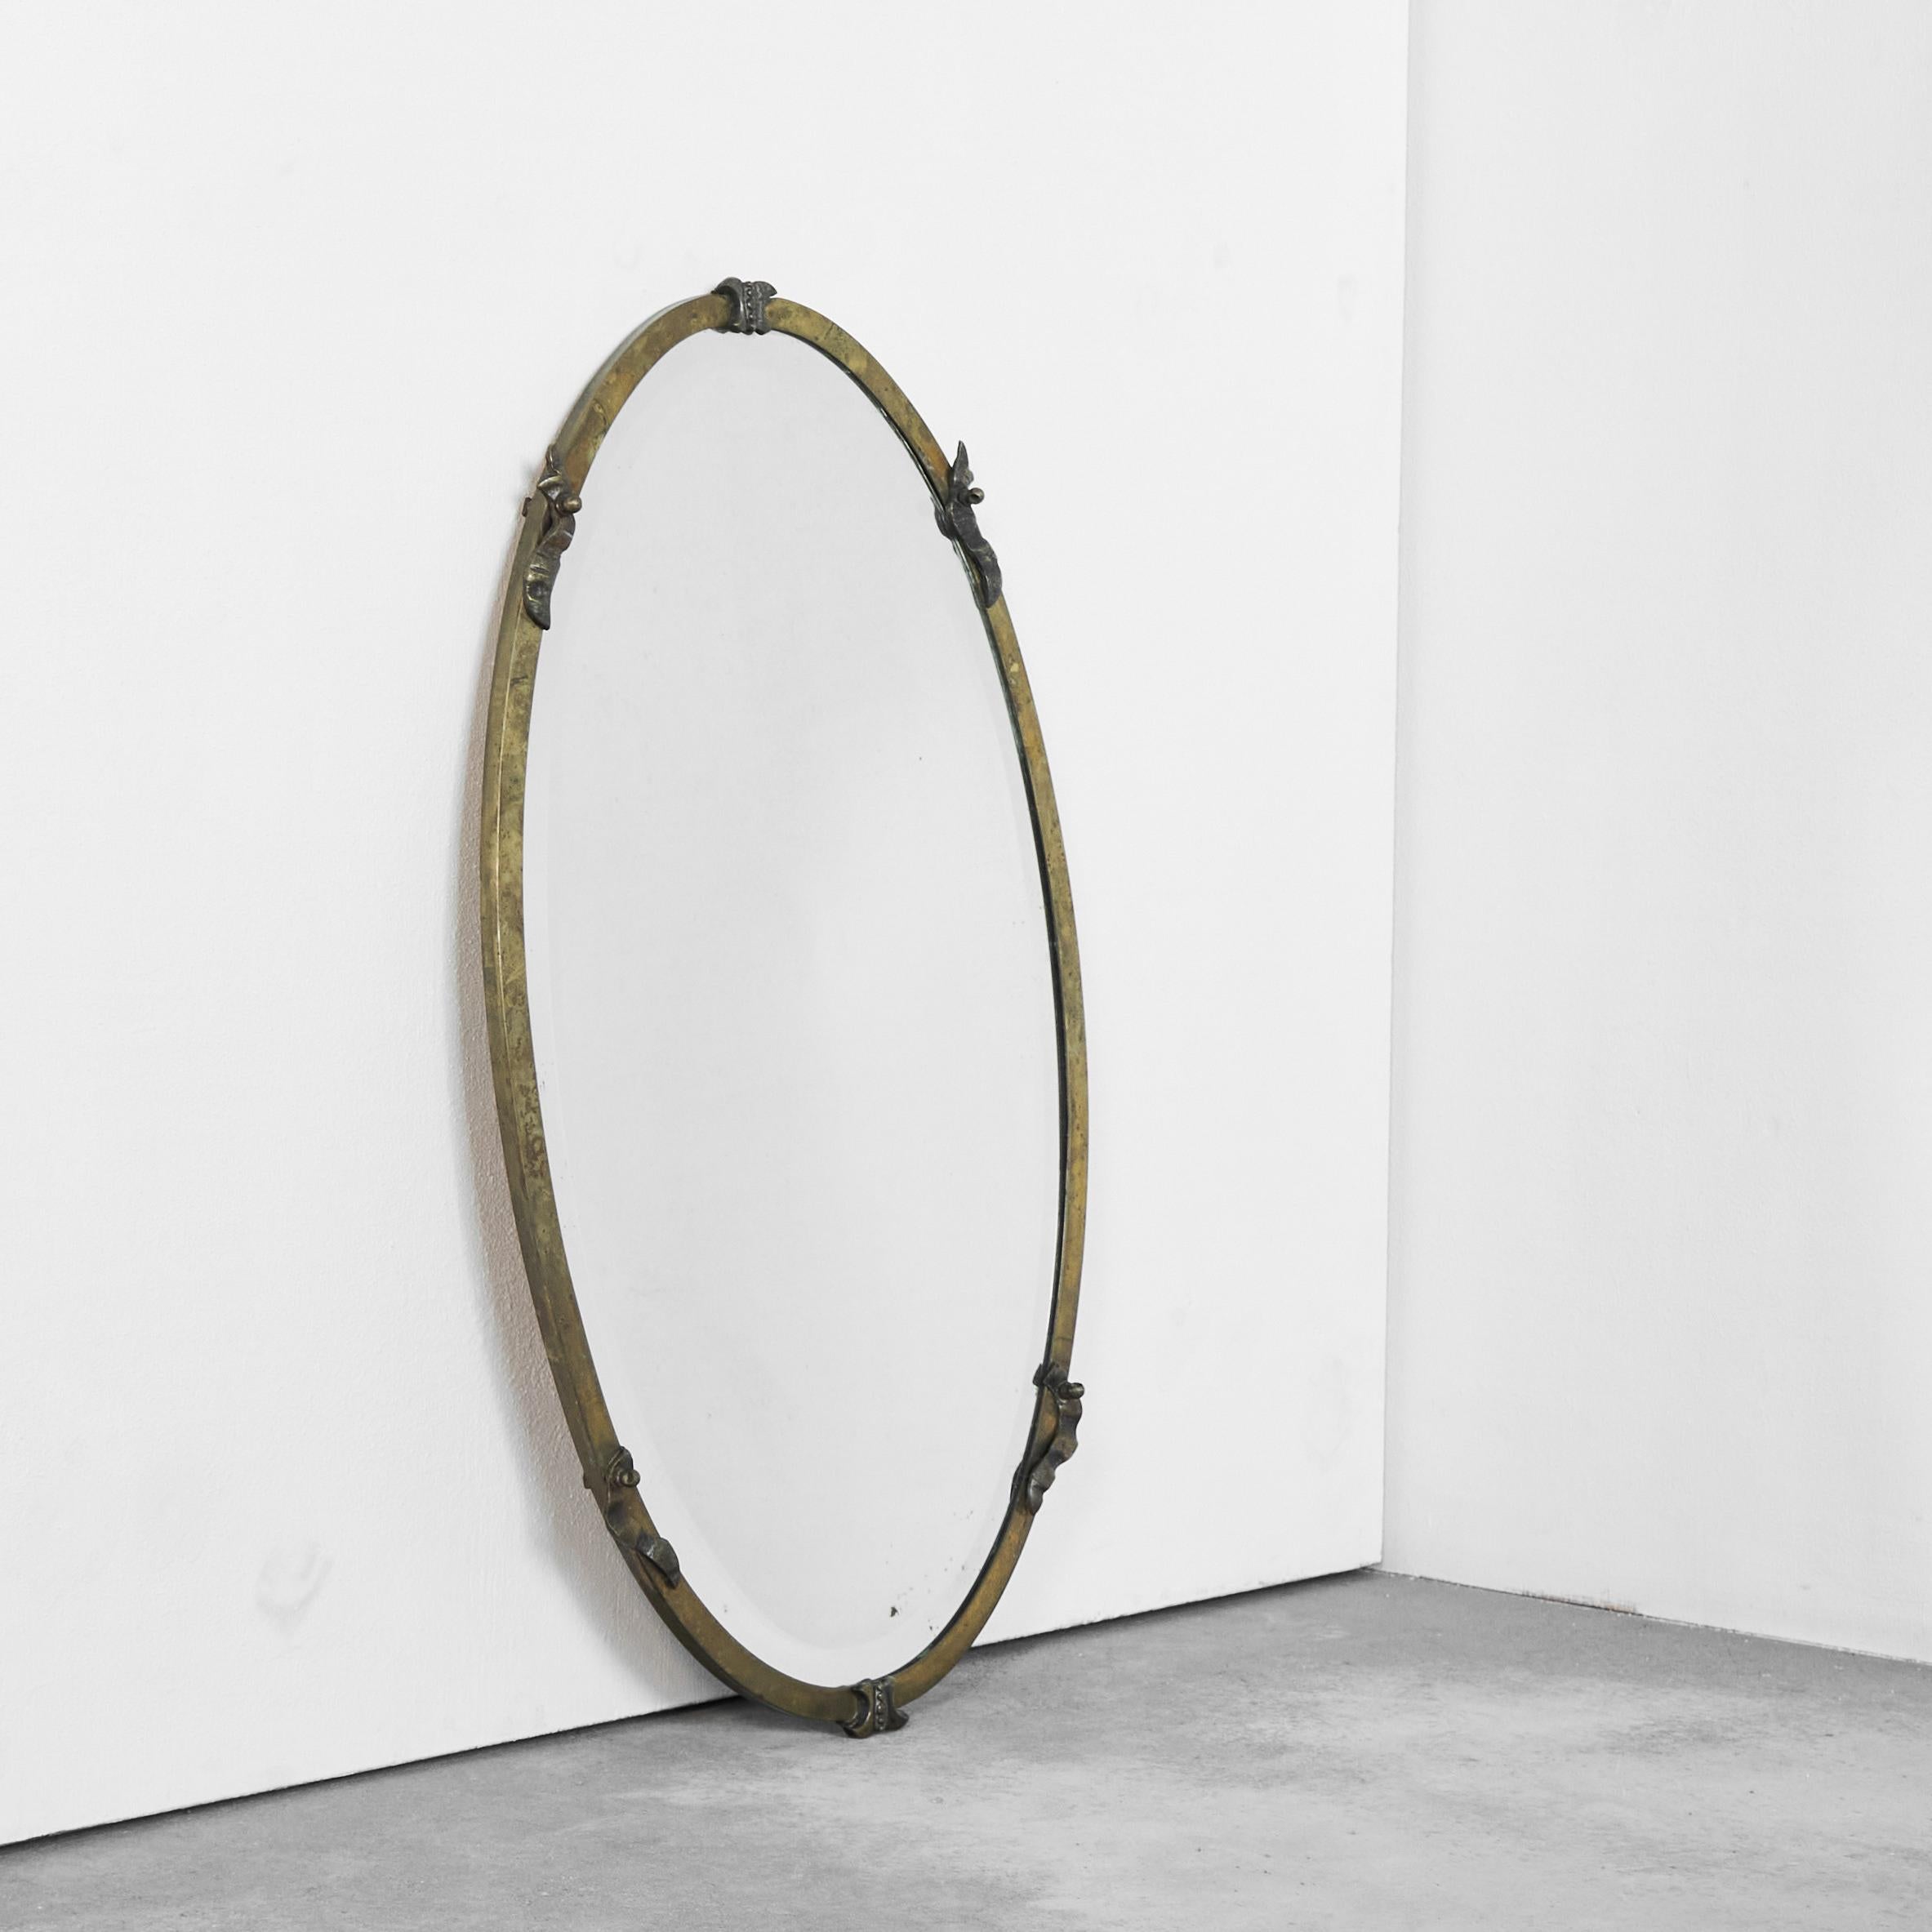 Oval Art Deco Mirror in Patinated Brass, Europe, 1930s.

This is a wonderful oval art deco wall mirror in beautifully patinated brass with intricate details. Versatile shape and size. Very refined with lots of interesting details like the brass